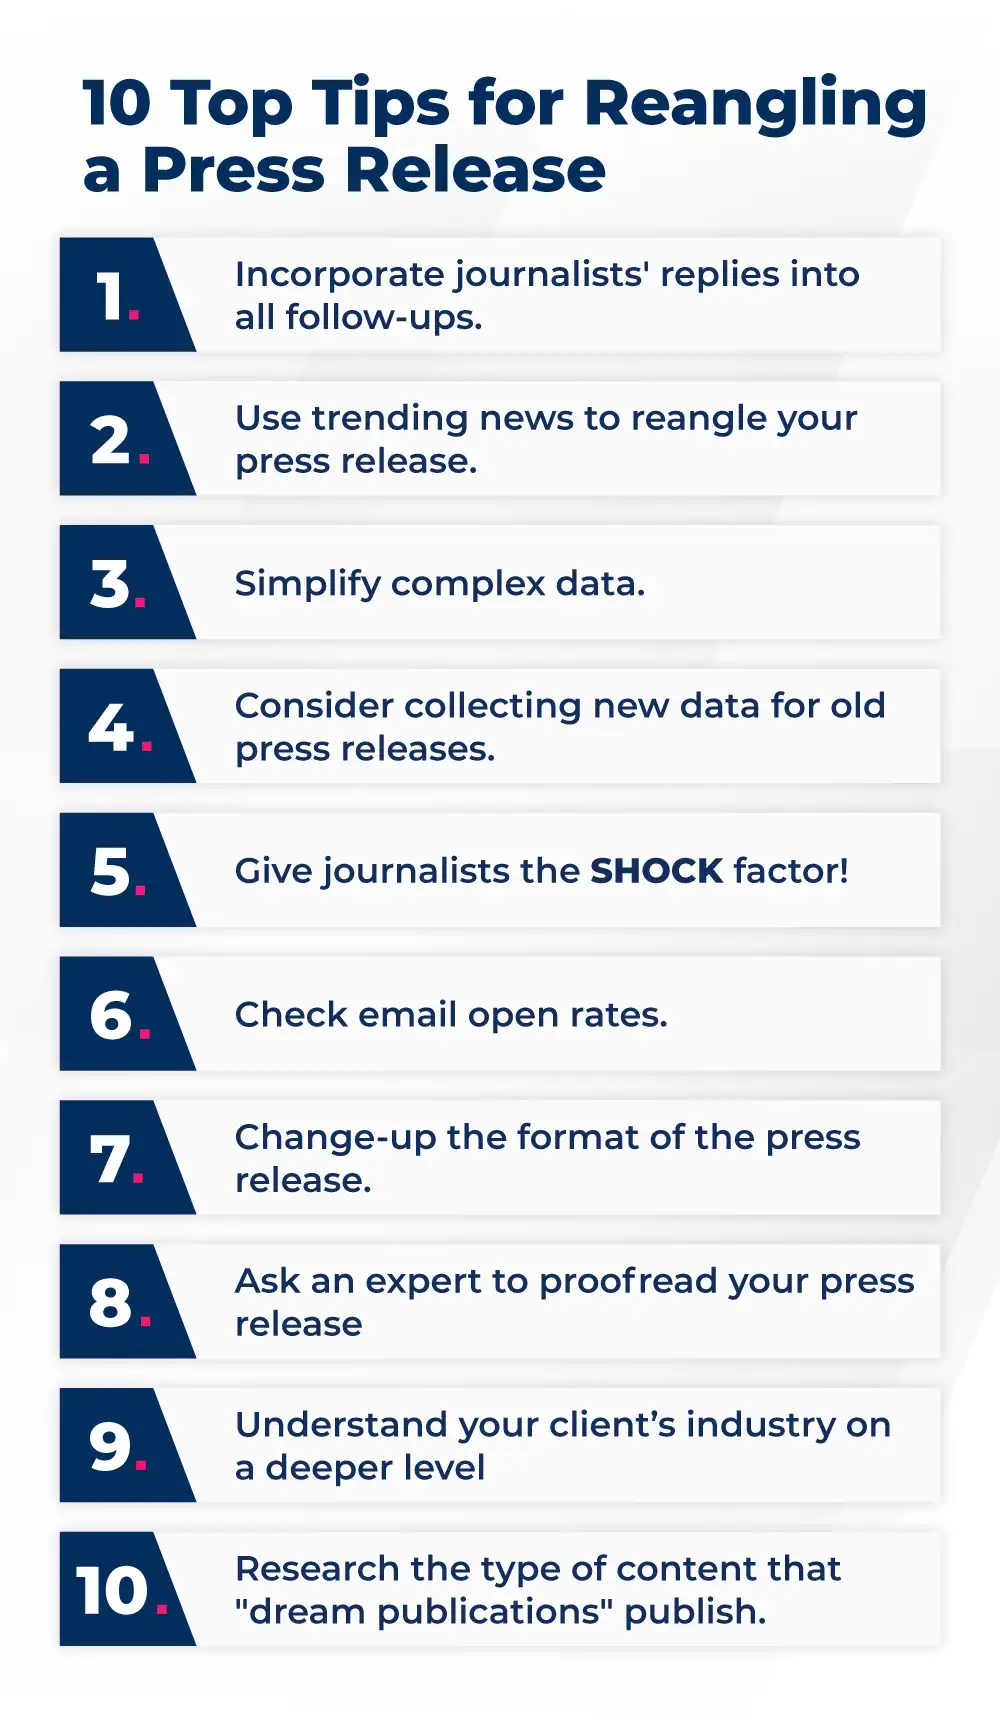 10 tips for reangling a press release